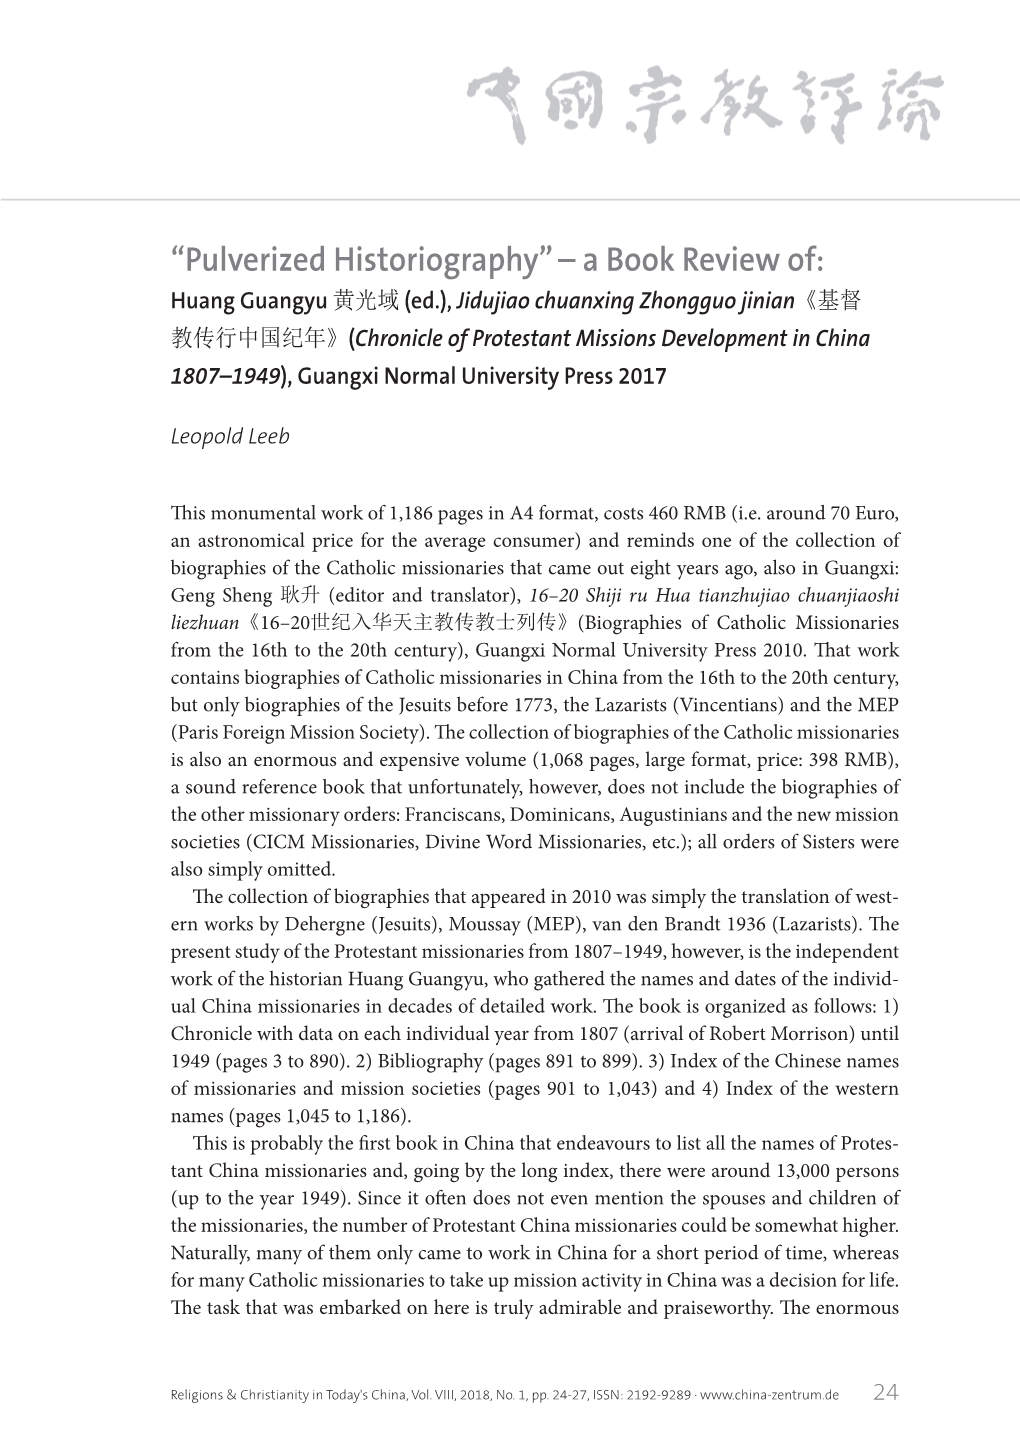 “Pulverized Historiography” – a Book Review